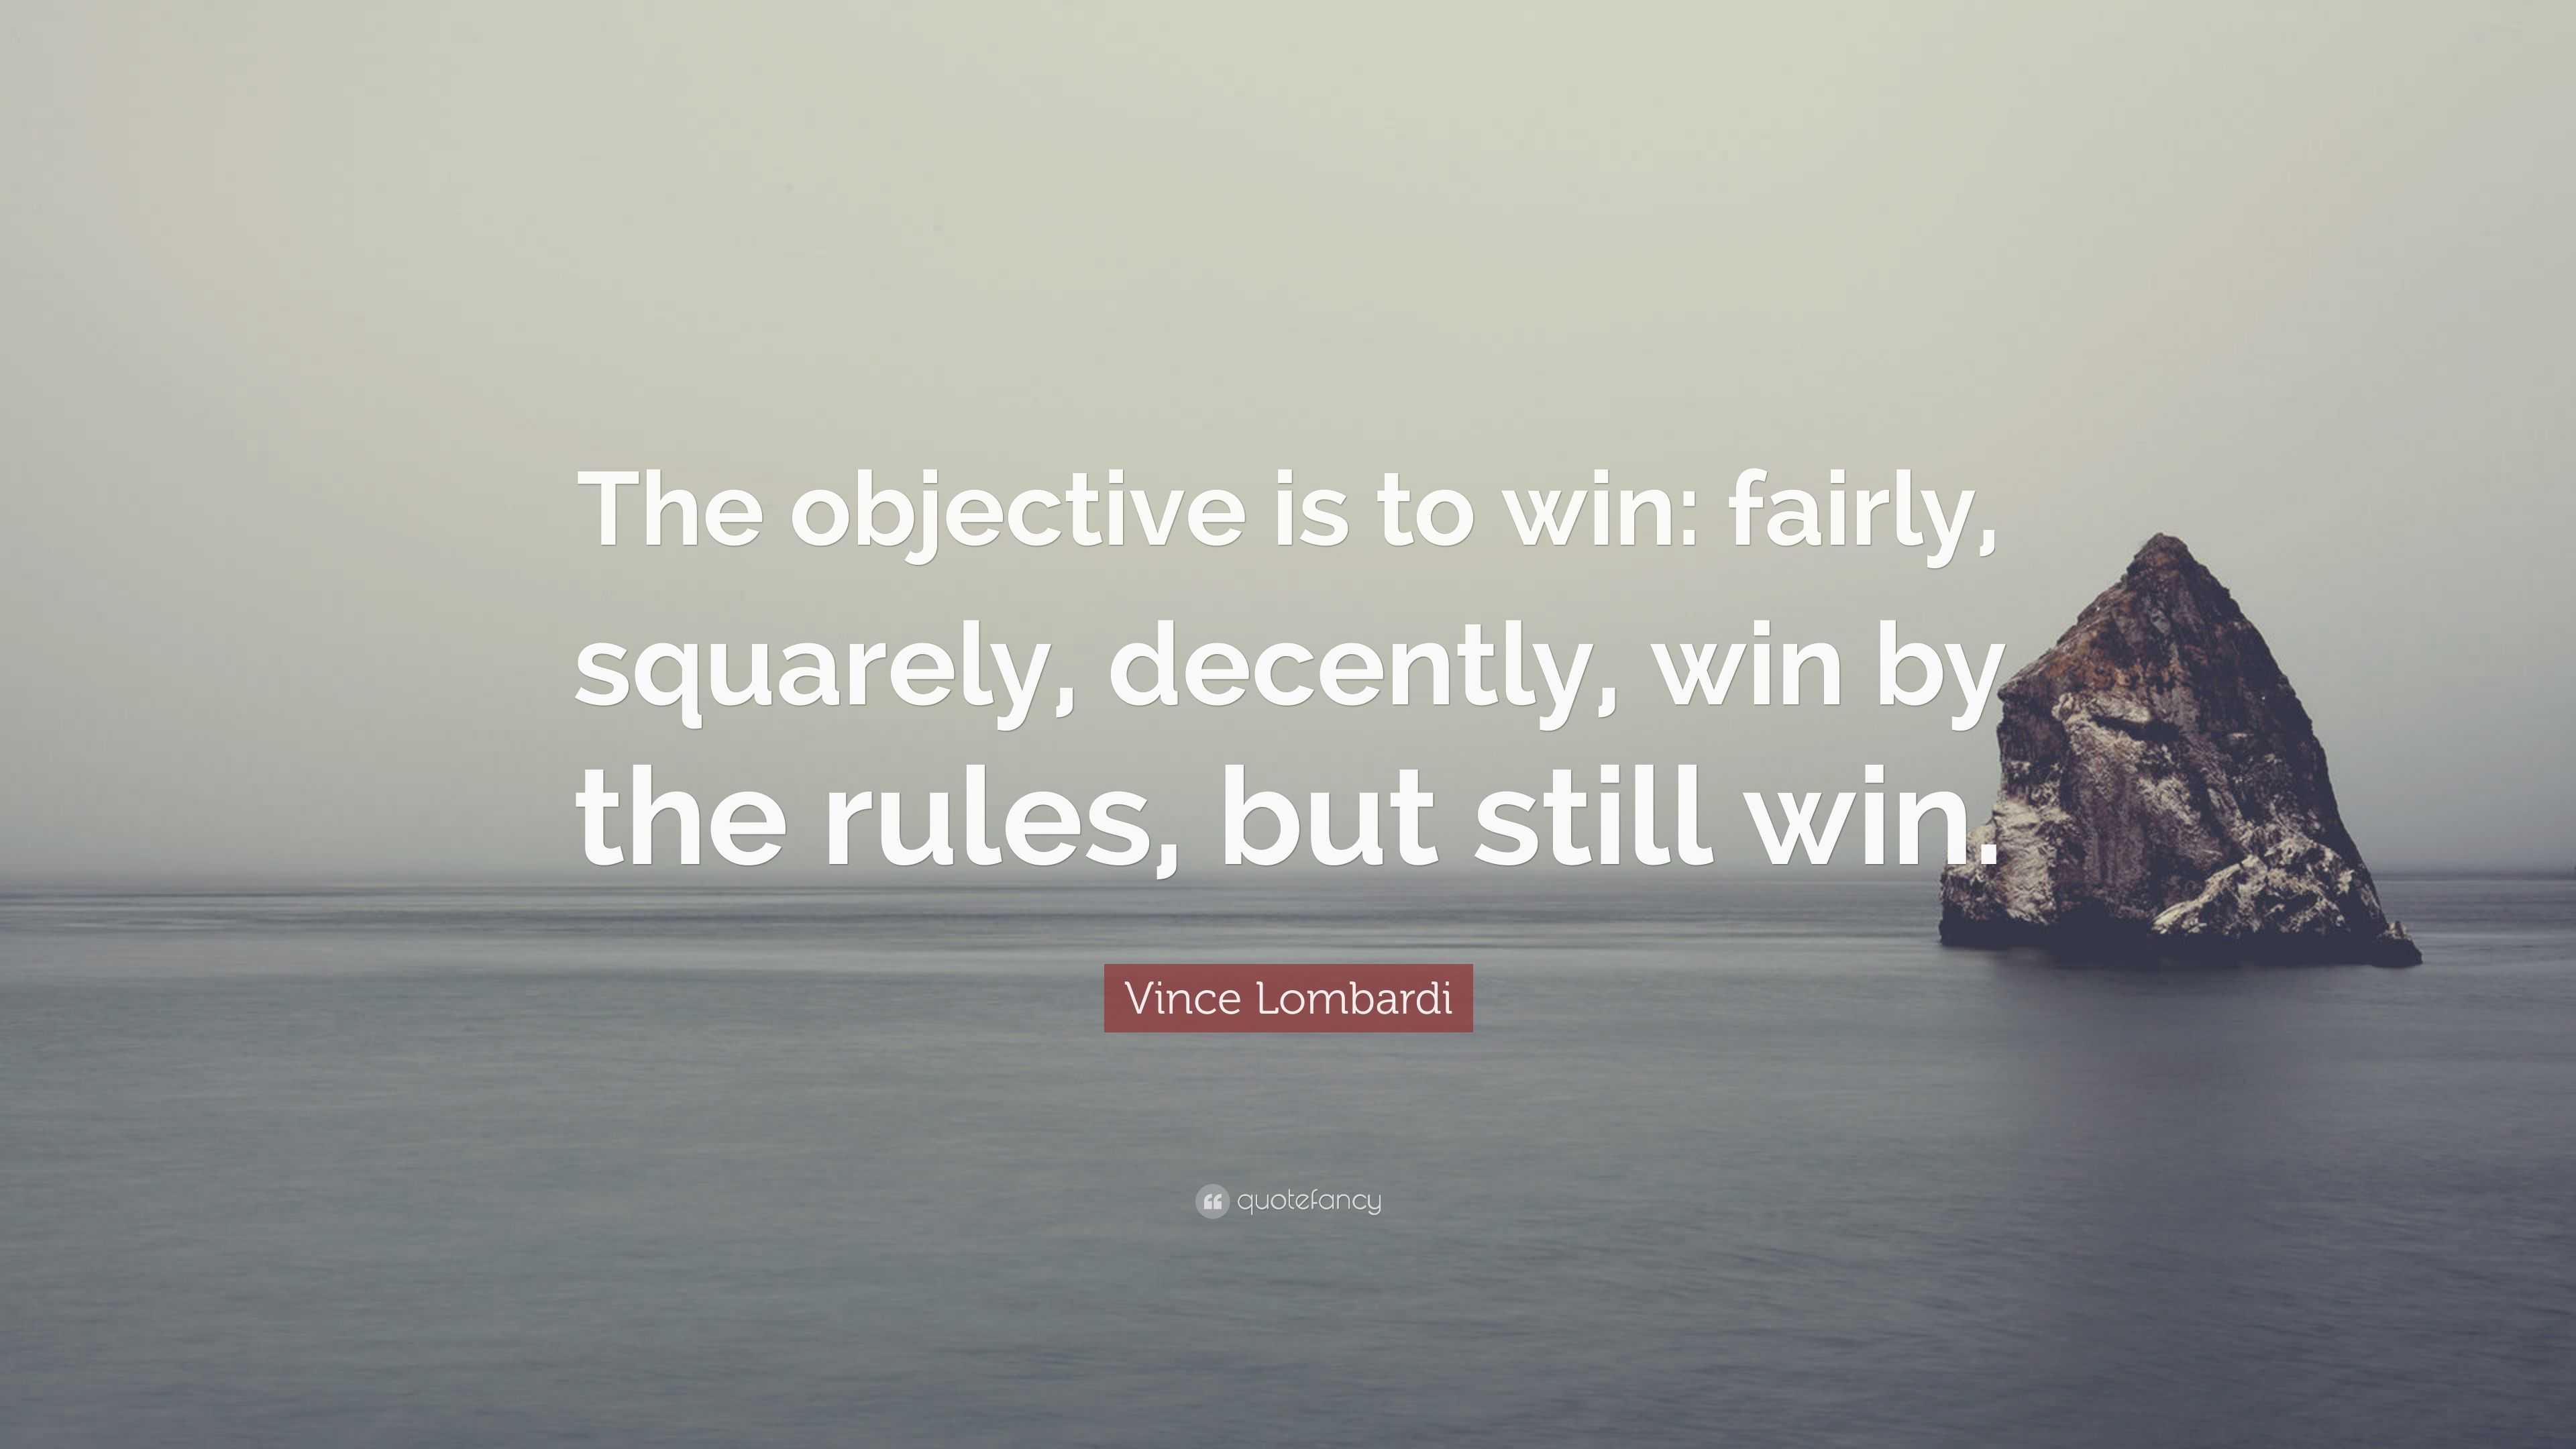 Vince Lombardi Quote: “The objective is to win: fairly, squarely, decently,  win by the rules, but